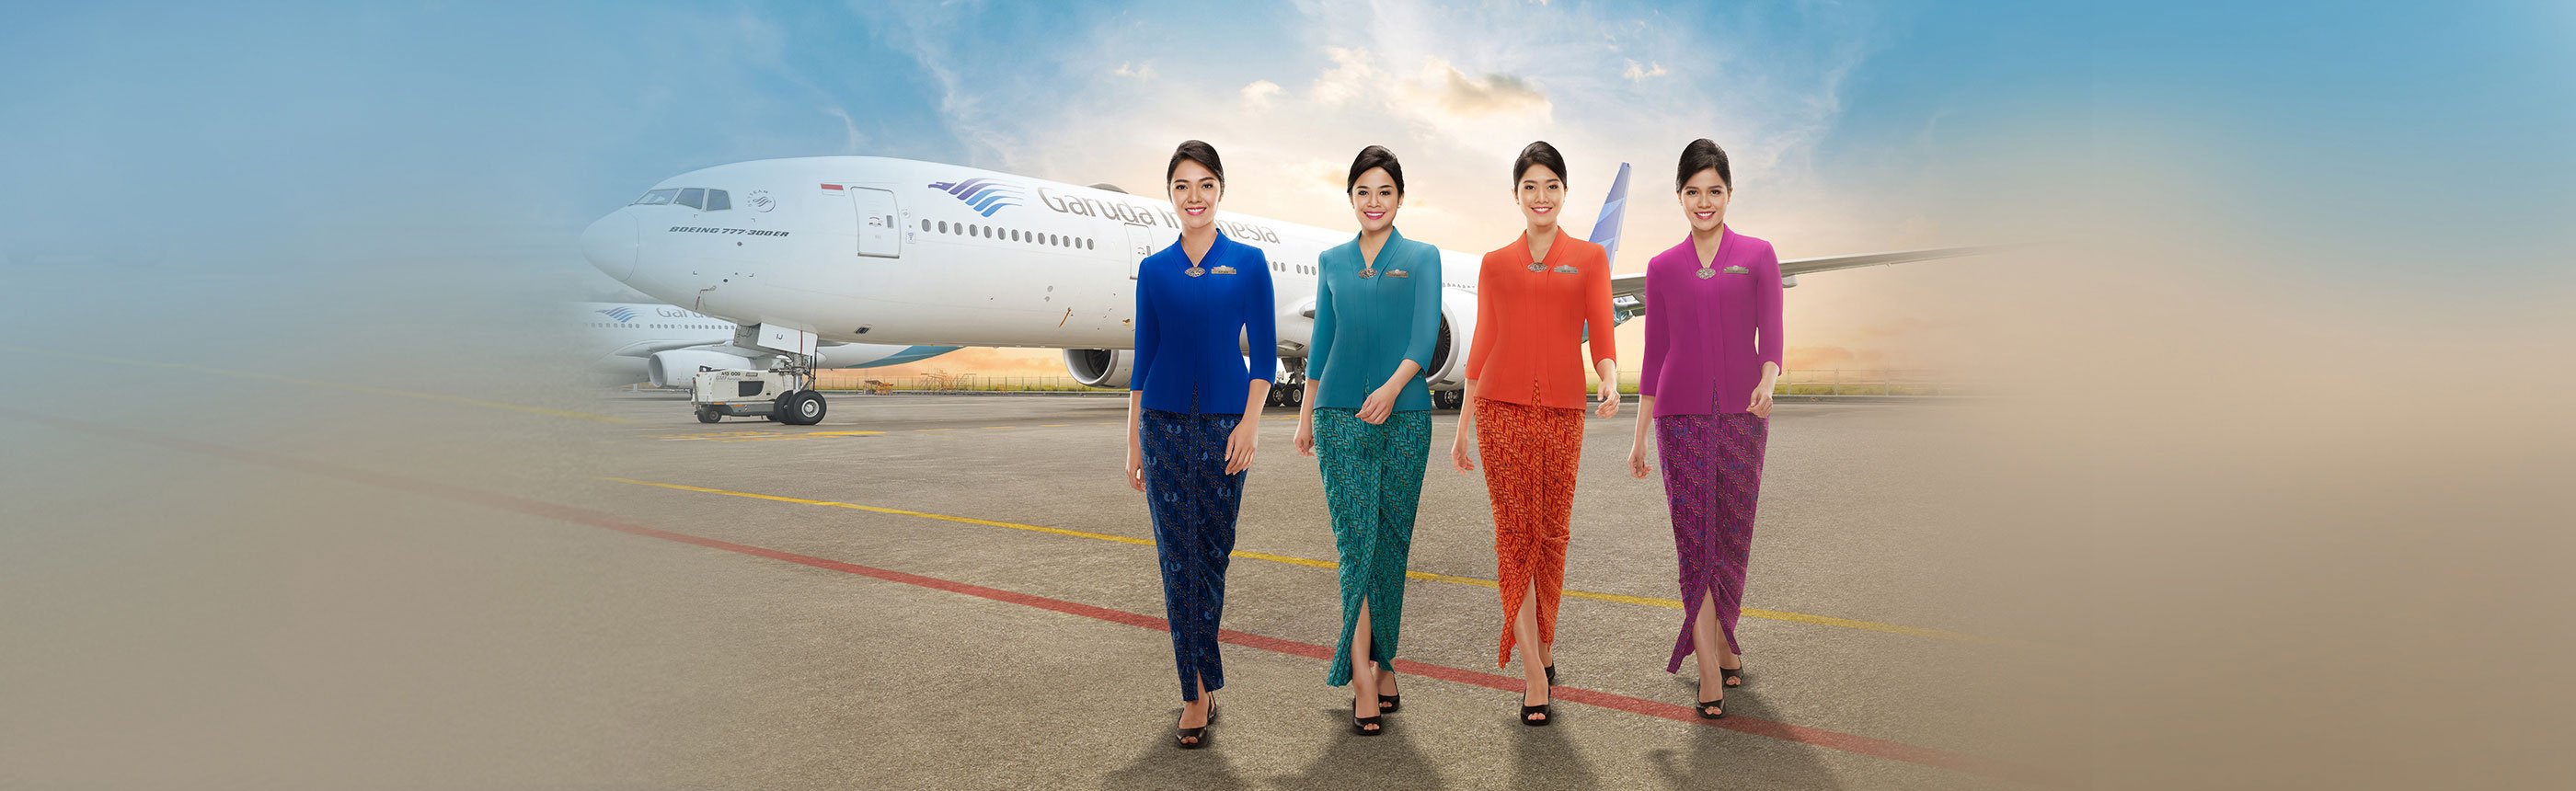 VOTE FOR US AS WORLD'S BEST CABIN CREW